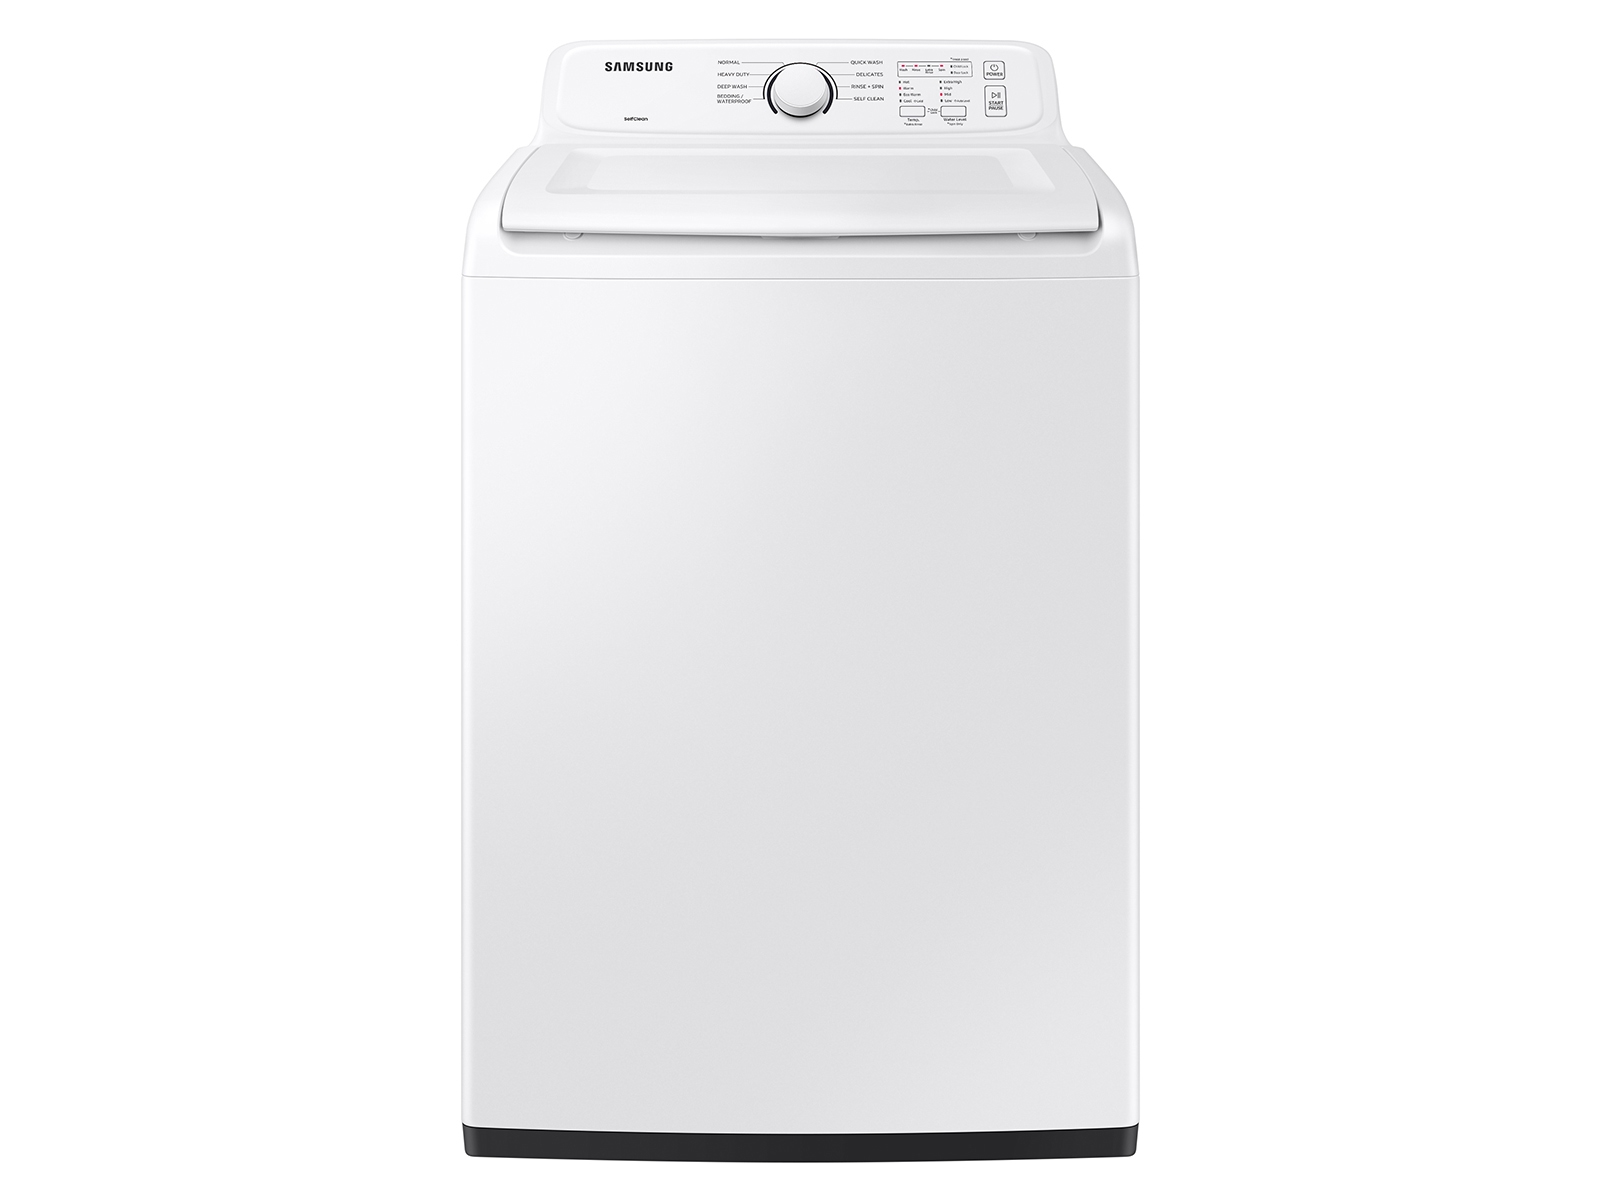 WHIRLPOOL BRAND EXPANDING LINEUP, RETAIL AVAILABILITY FOR AWARD-WINNING TOP  LOAD WASHER WITH 2 IN 1 REMOVABLE AGITATOR